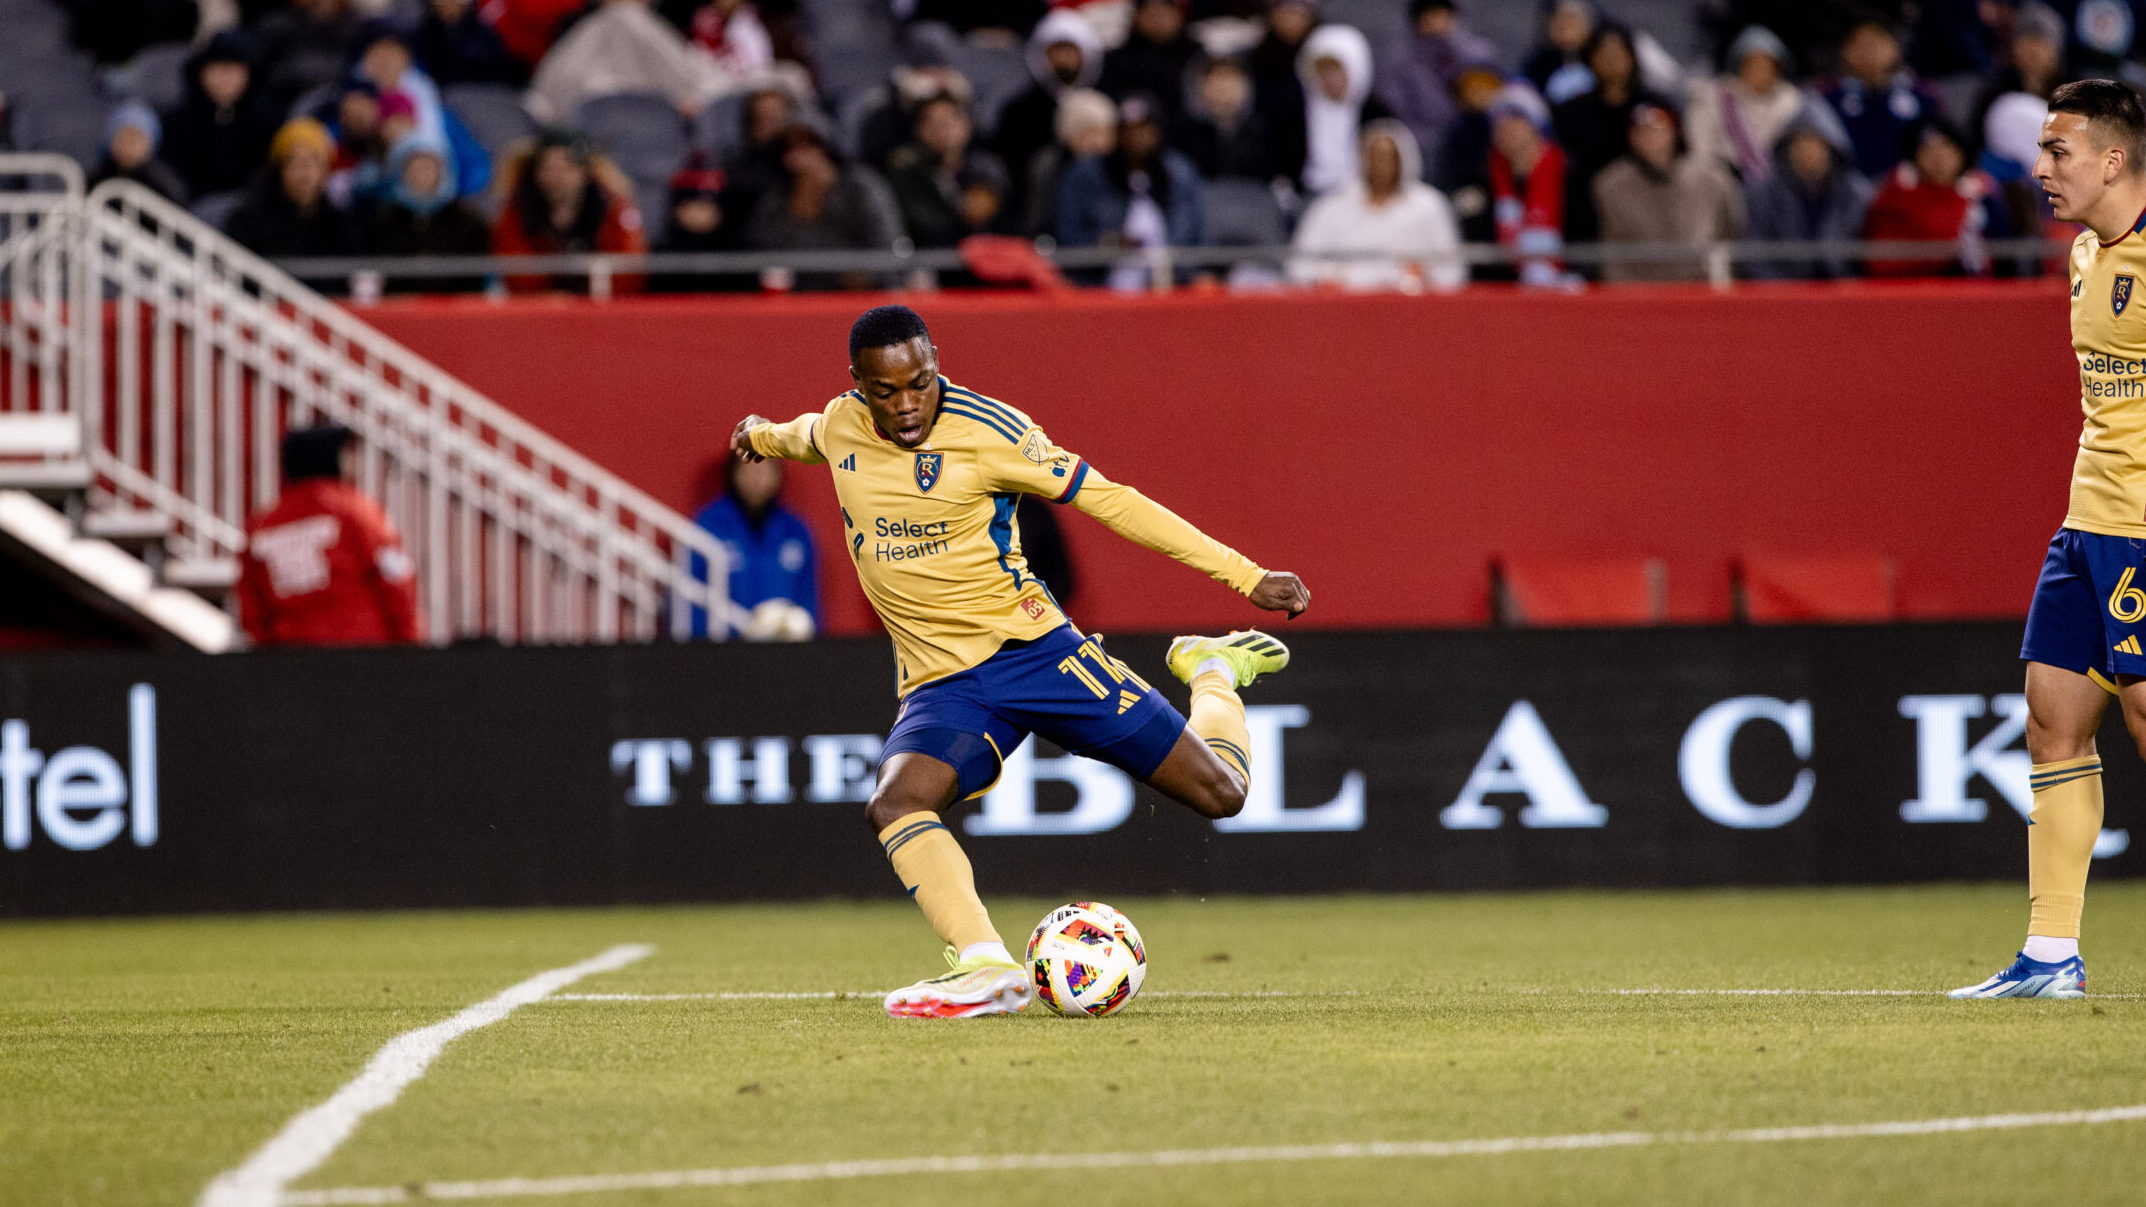 Andres Gomez Gives RSL First-Half Lead Against Philadelphia Union